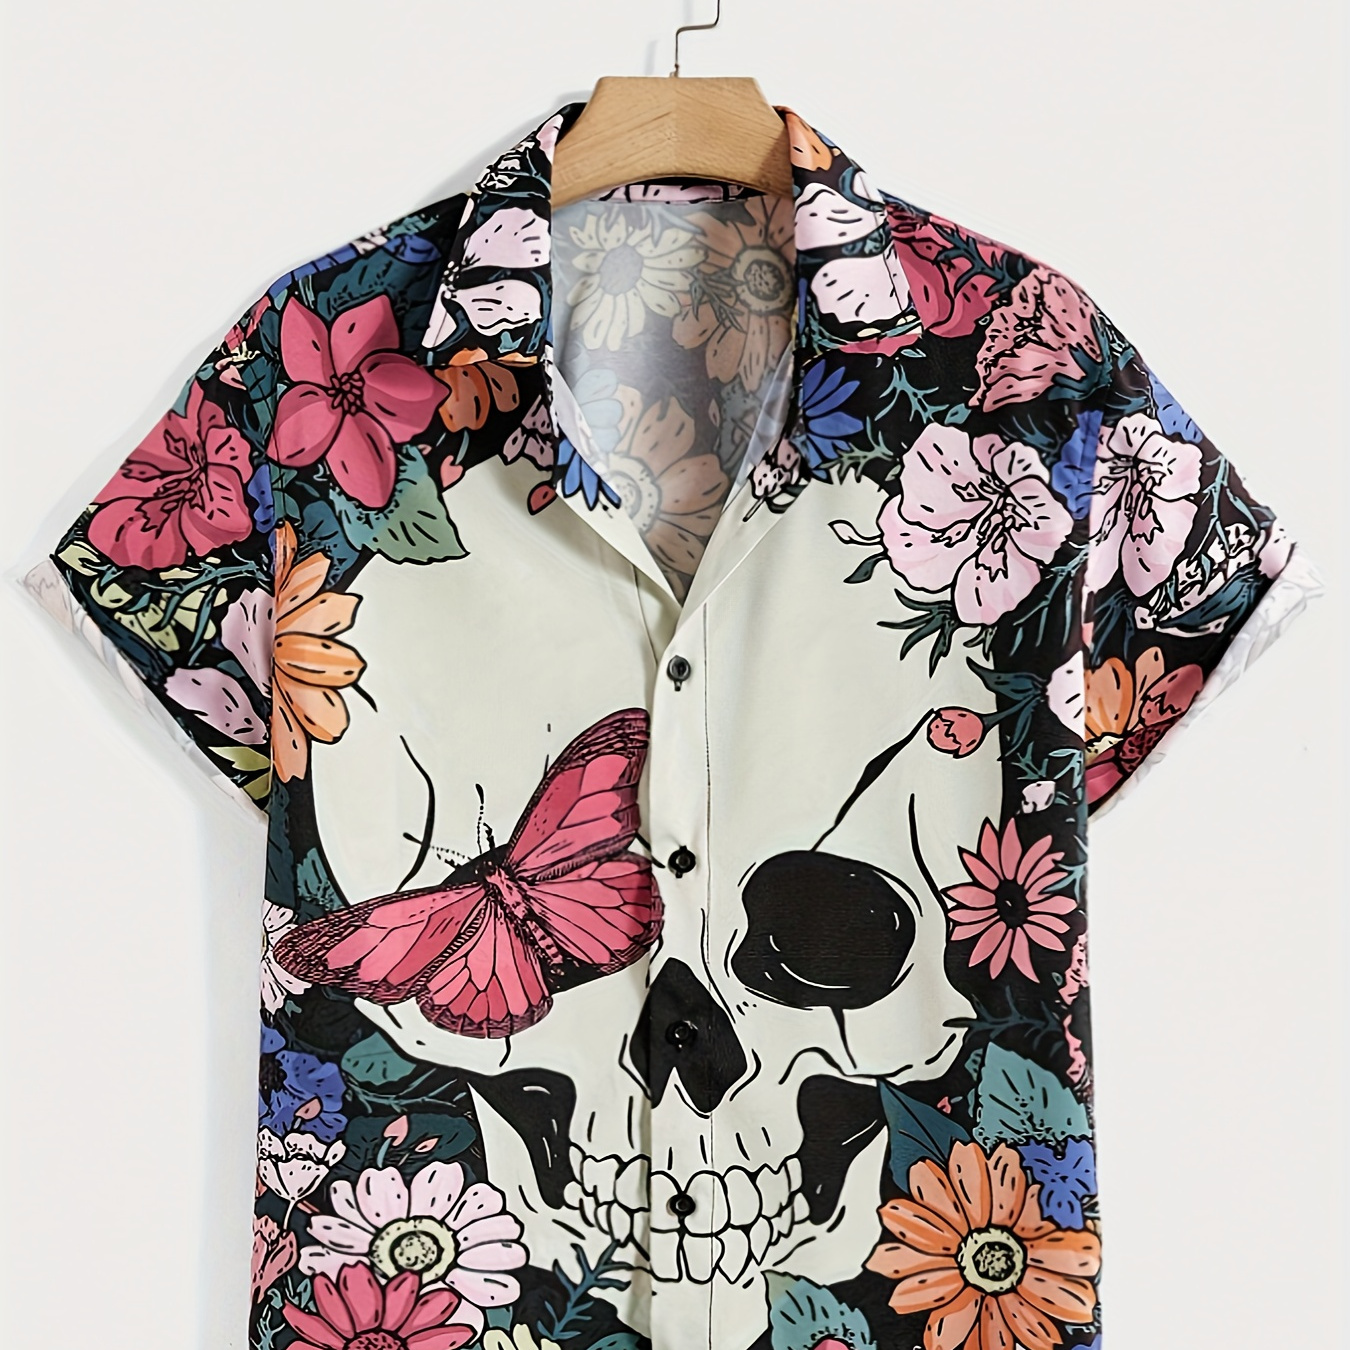 

Men's Stylish Loose Skull Pattern Shirt, Casual Breathable Lapel Button Up Short Sleeve Shirt Top For City Walk Street Hanging Outdoor Activities